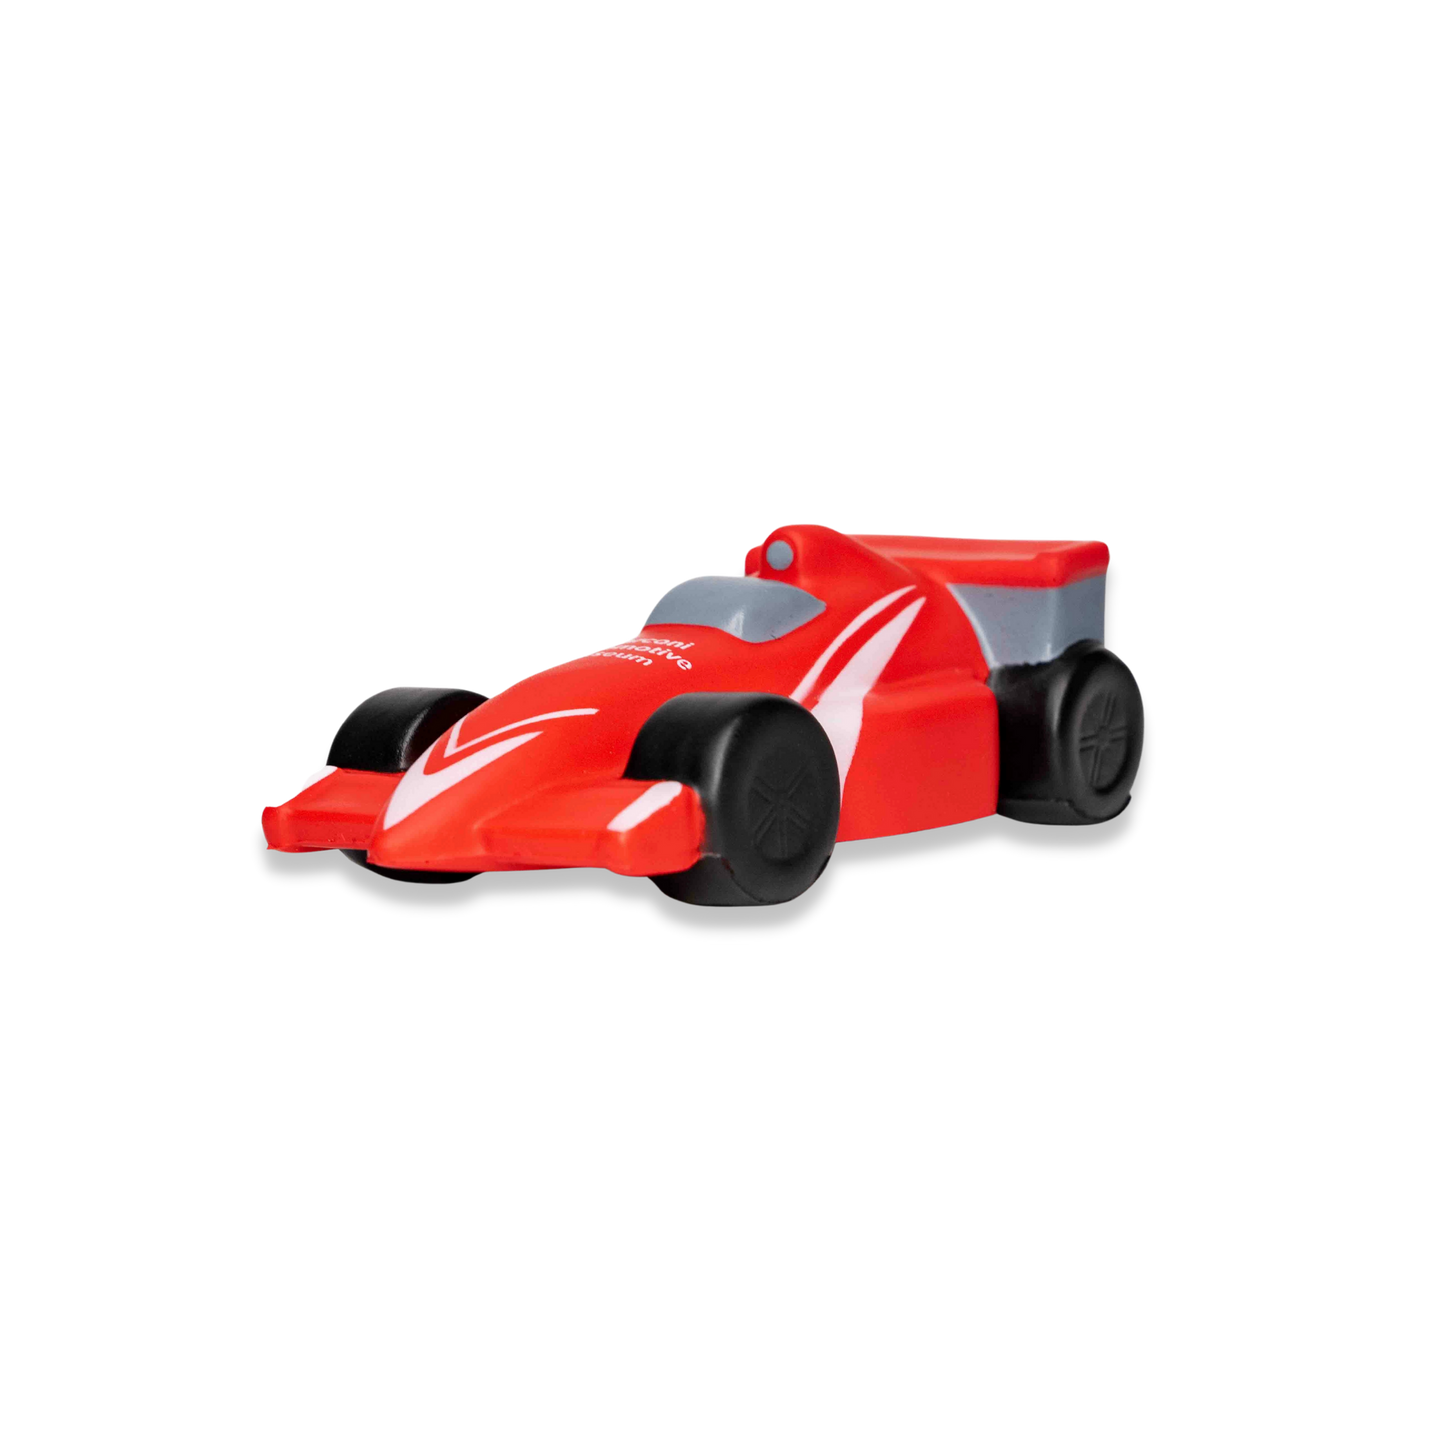 NEW - F1 Car Toy/Stress Reliever